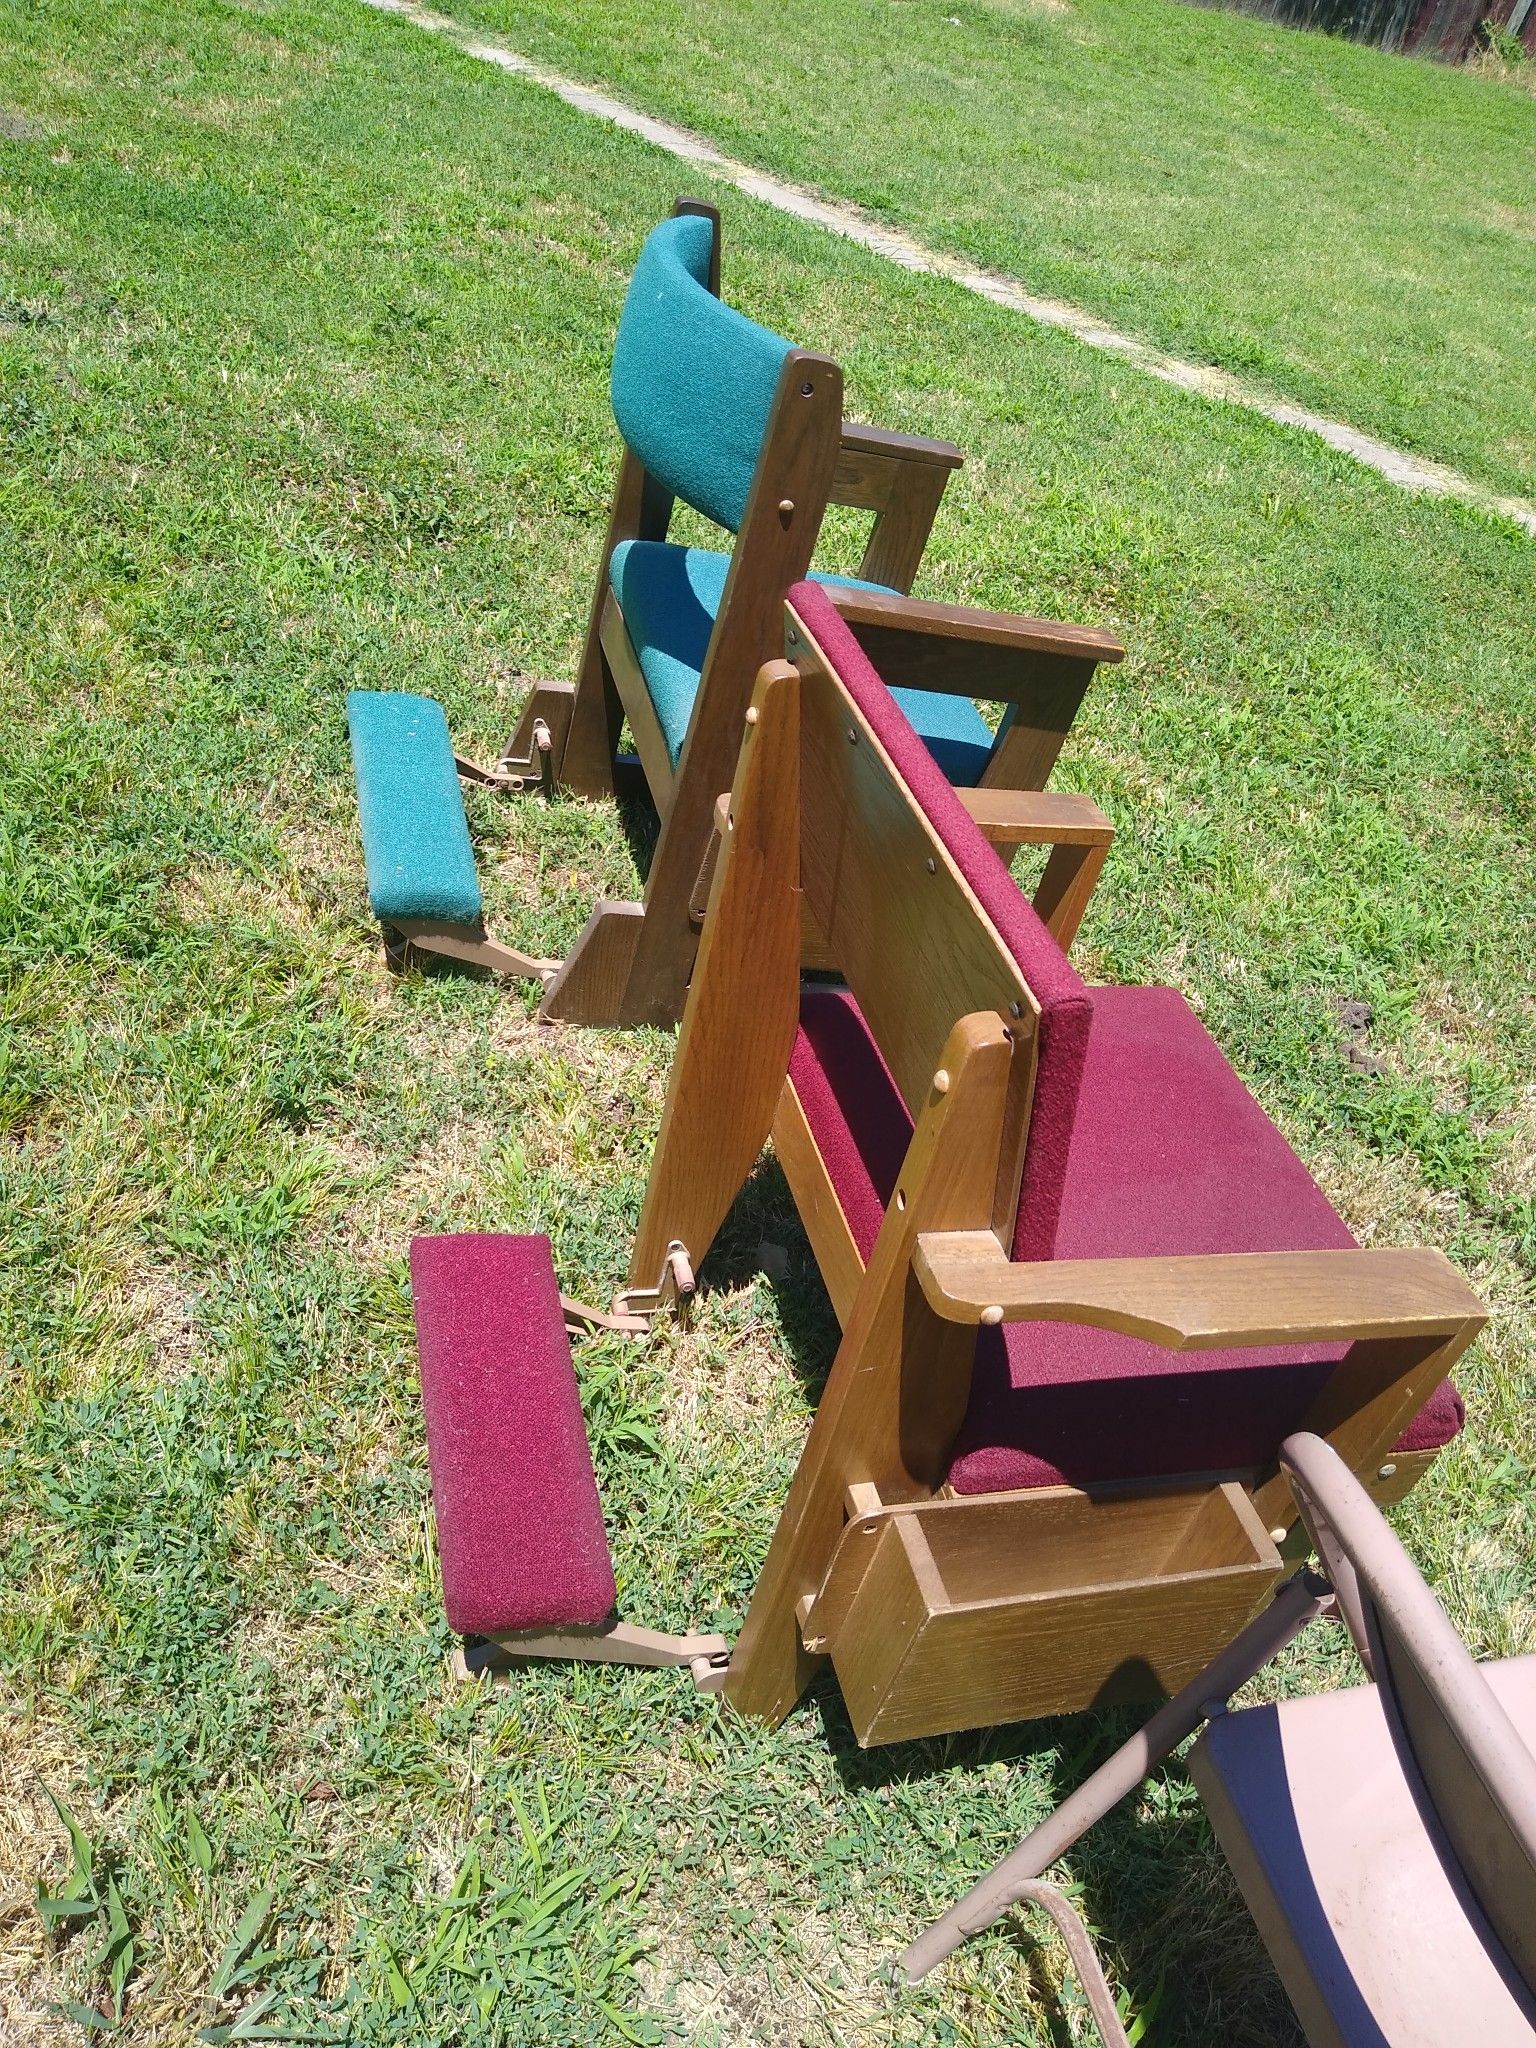 !!! Church kneeling chairs that fold up n back $20 for both !!!